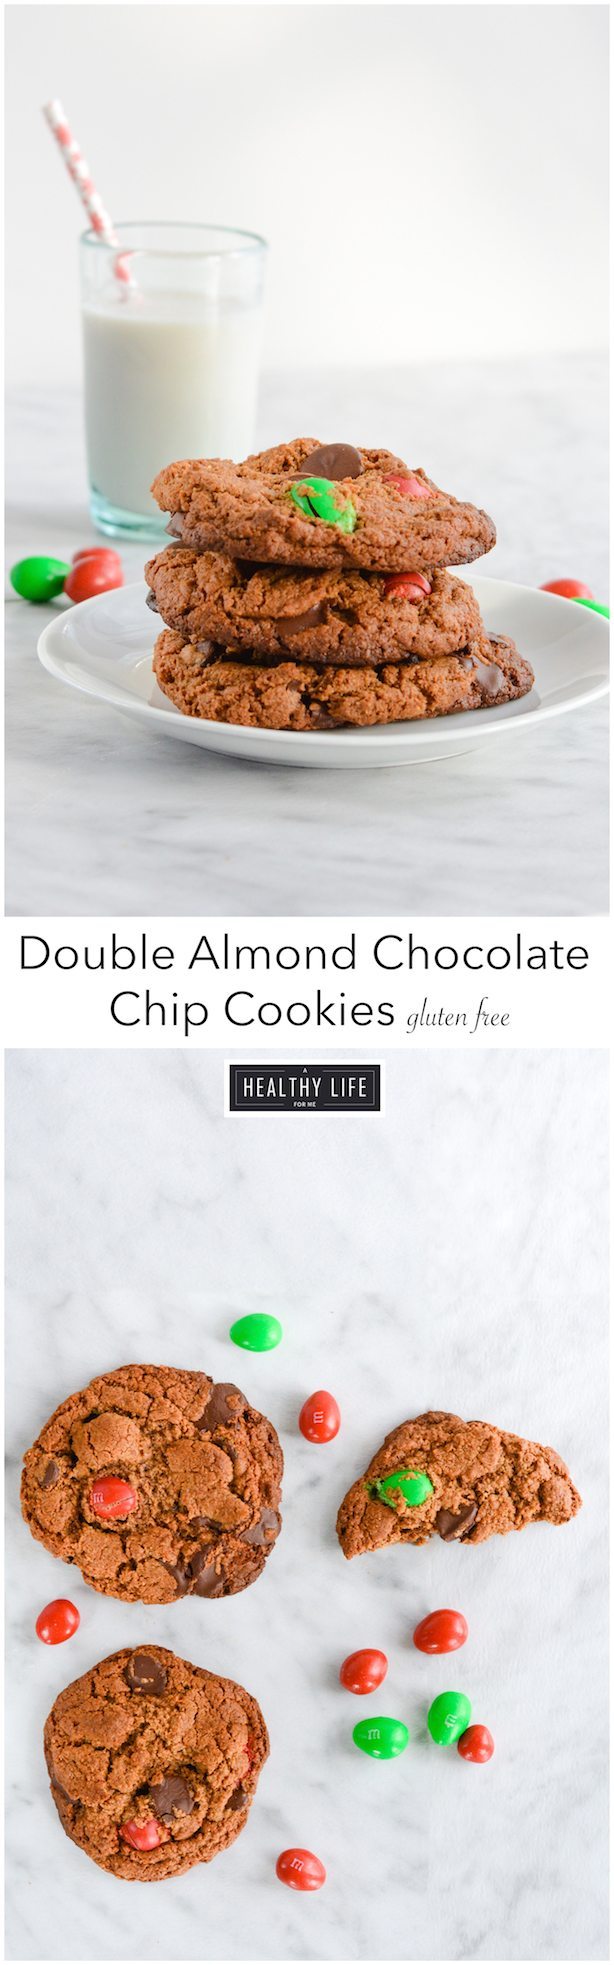 Double Almond Chocolate Chip Cookies are crisp and crunchy with almond and choclate combination gluten free | ahealthylifeforme.com